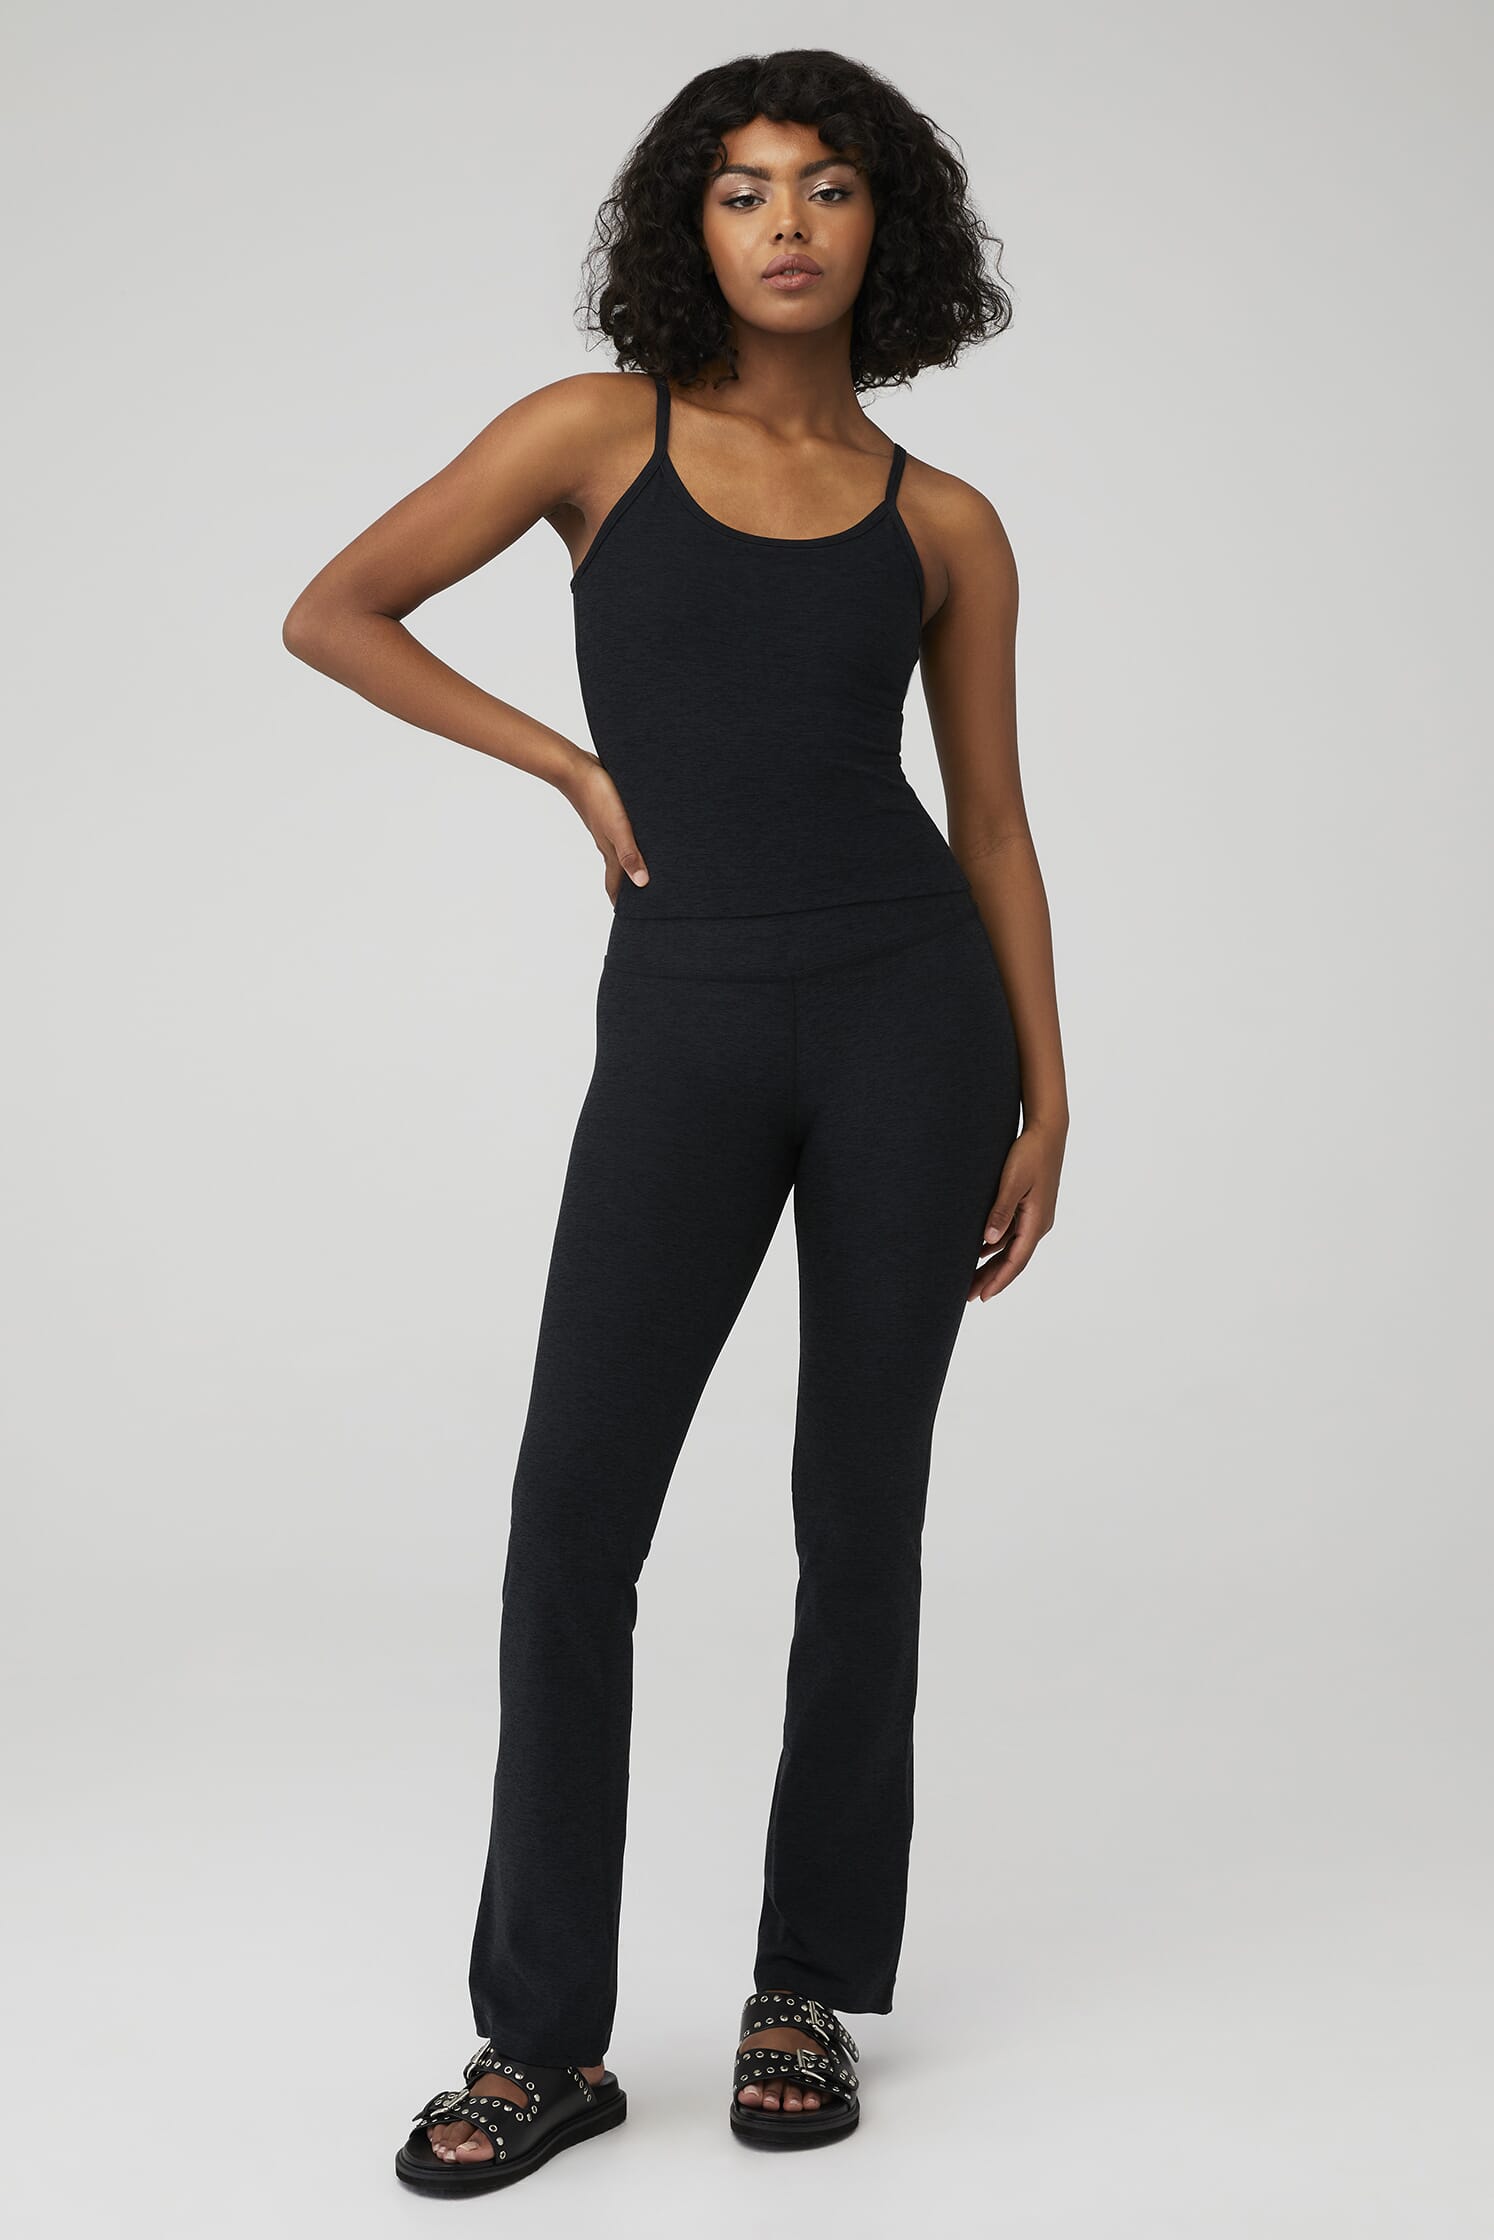 https://images.fashionpass.com/products/spacedye-high-waisted-practice-pant-beyond-yoga-darkest-night-2c5-4.jpg?profile=a